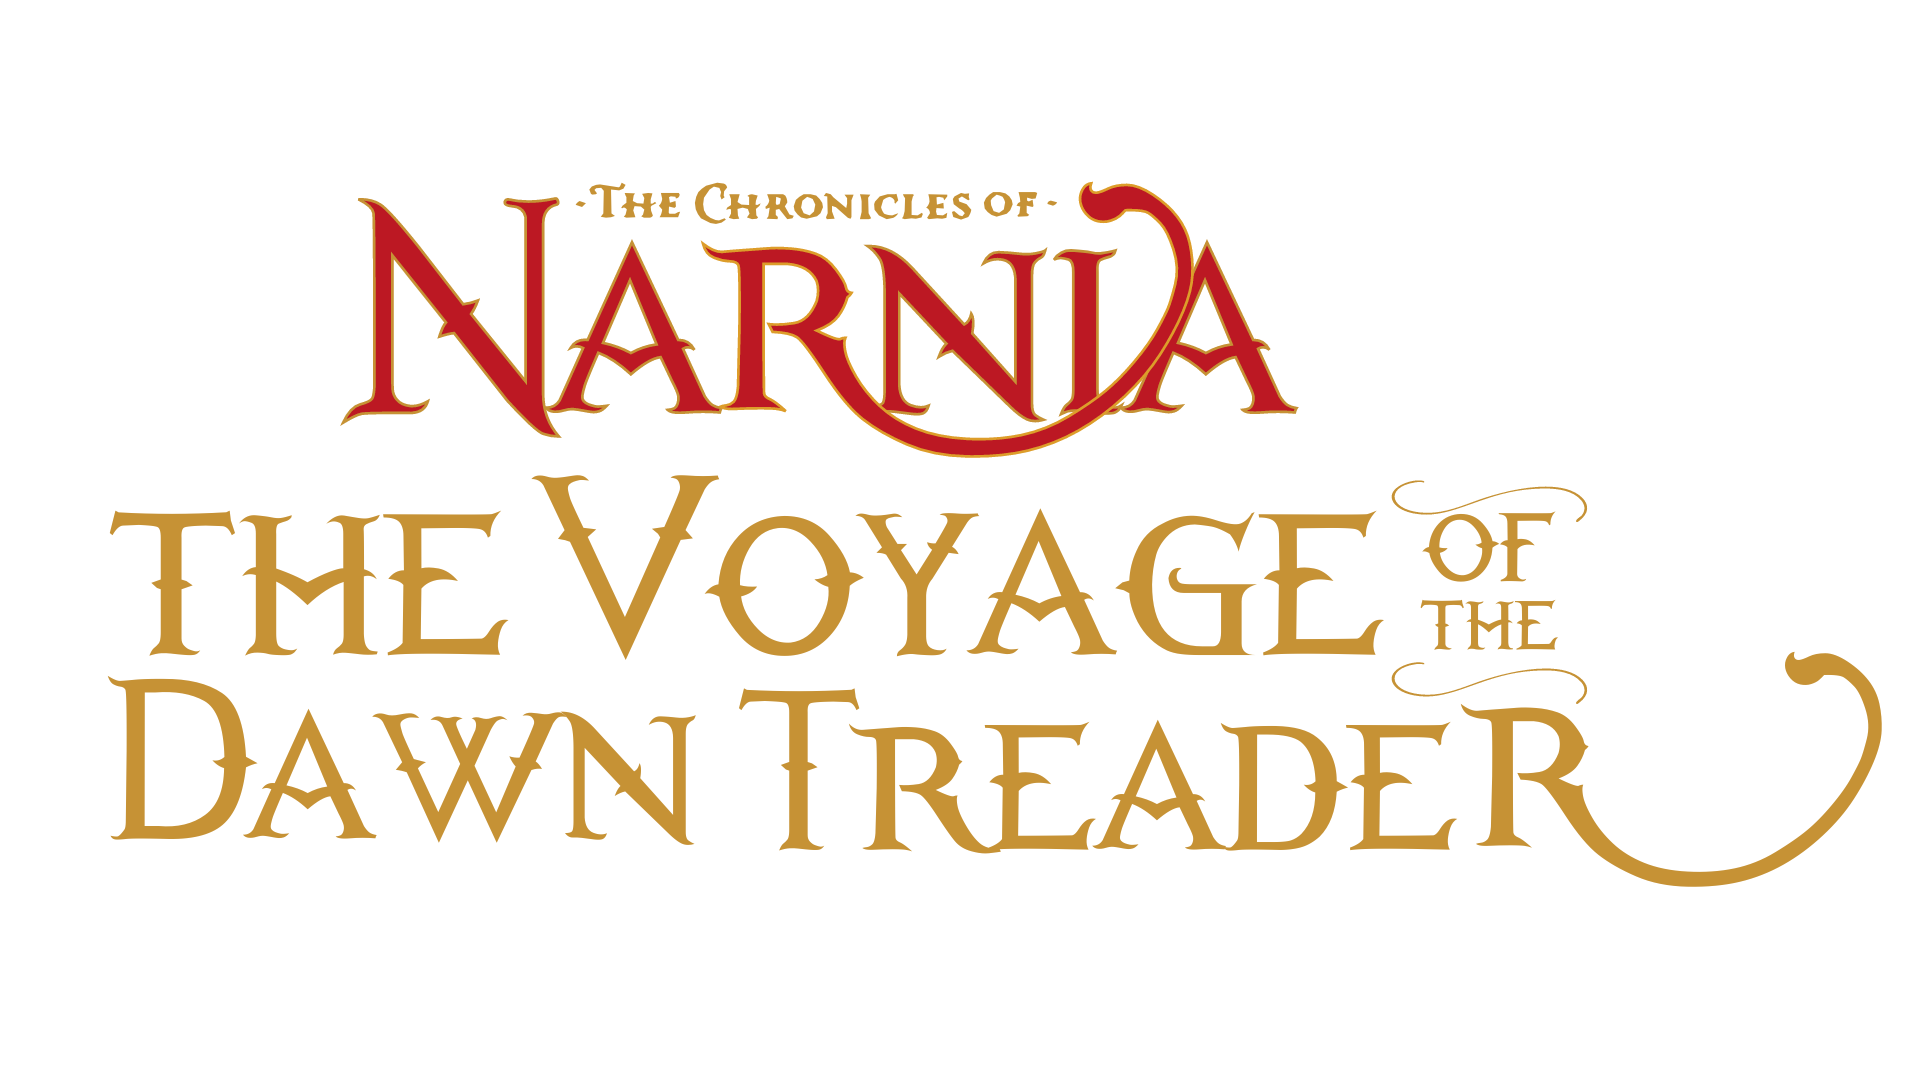 The Voyage of the Dawn Treader full logo gold